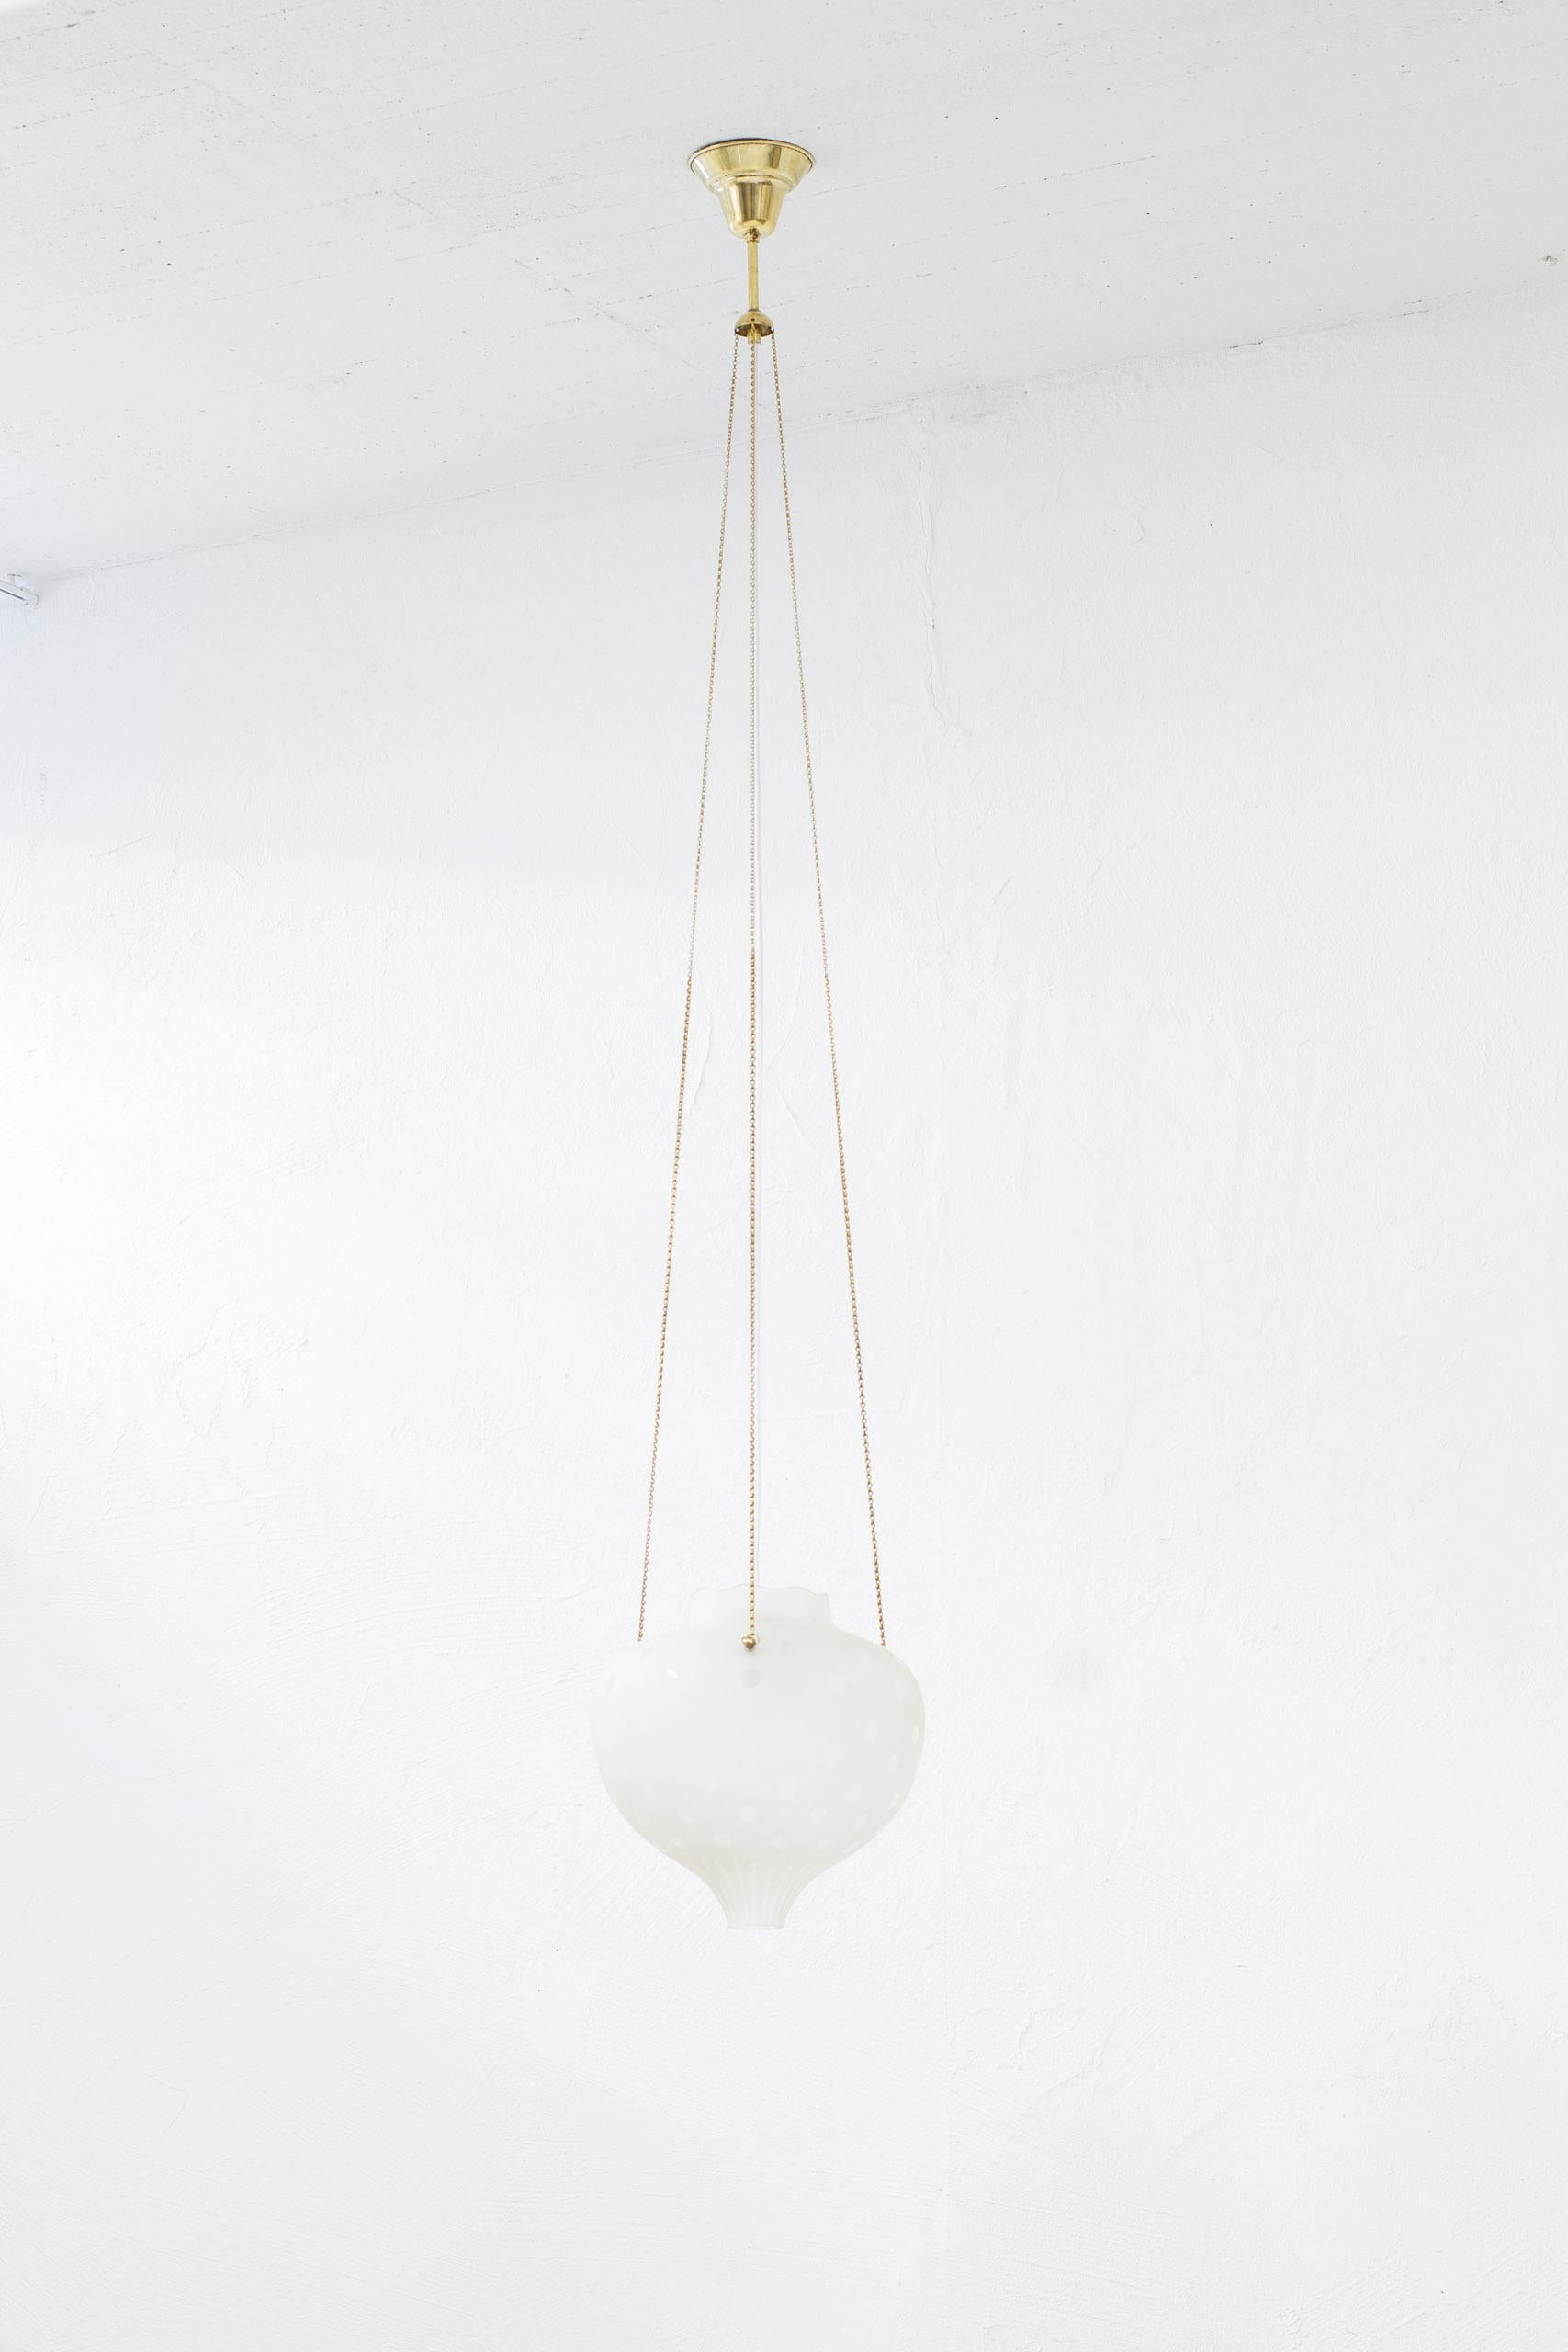 Swedish modern ceiling pendant attributed to Flygsfors. Made from etched and frosted glass with brass details, chain and ceiling mount. Very good vintage condition with age related patina and wear.

Dimensions: 
Ø. 30 
H. 30 cm 
(total height